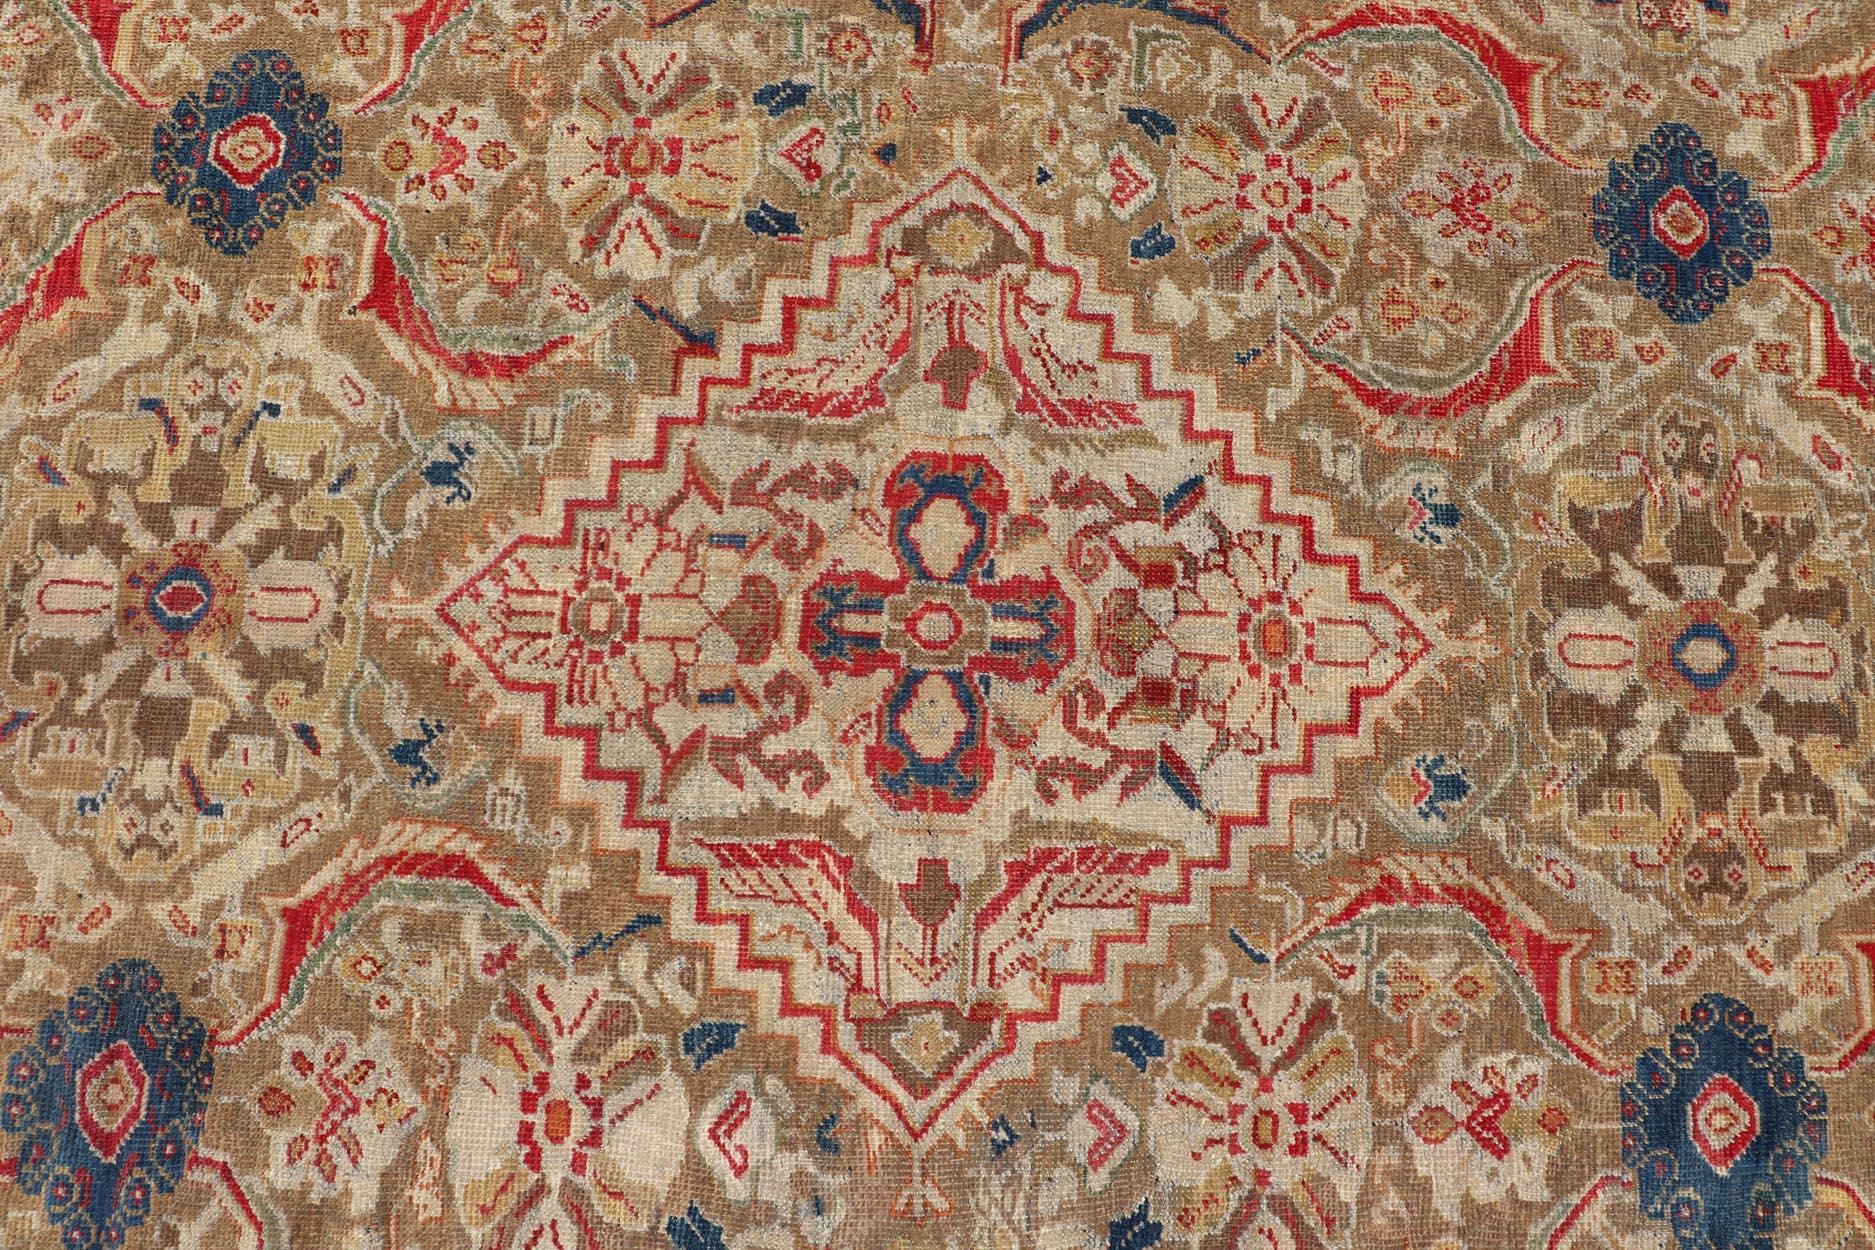 Hand-Knotted Antique Persian Sultanabad Carpet with Geometric Design In Green, Blue and Red For Sale